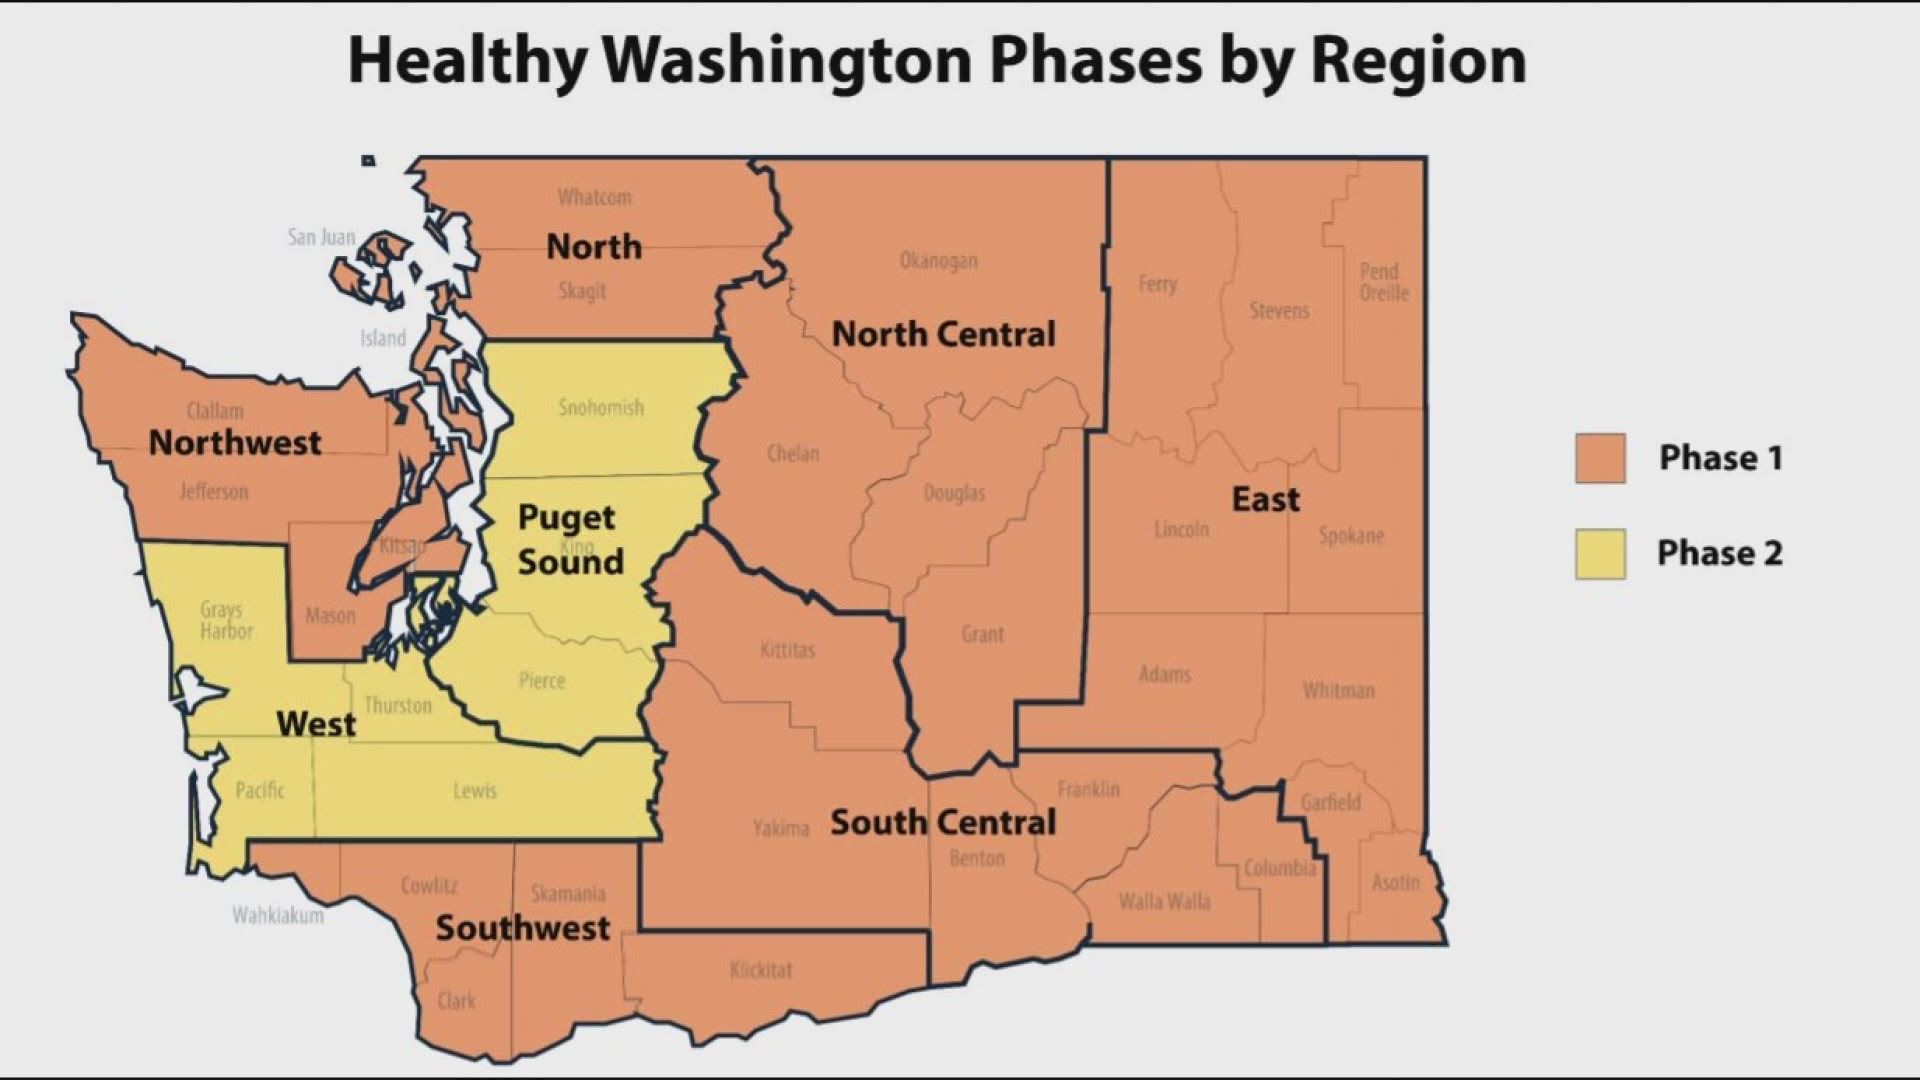 Seven counties in the Puget Sound and West regions can move to Phase 2 of the "Healthy Washington" plan. Counties need to meet three out of four metrics to qualify.